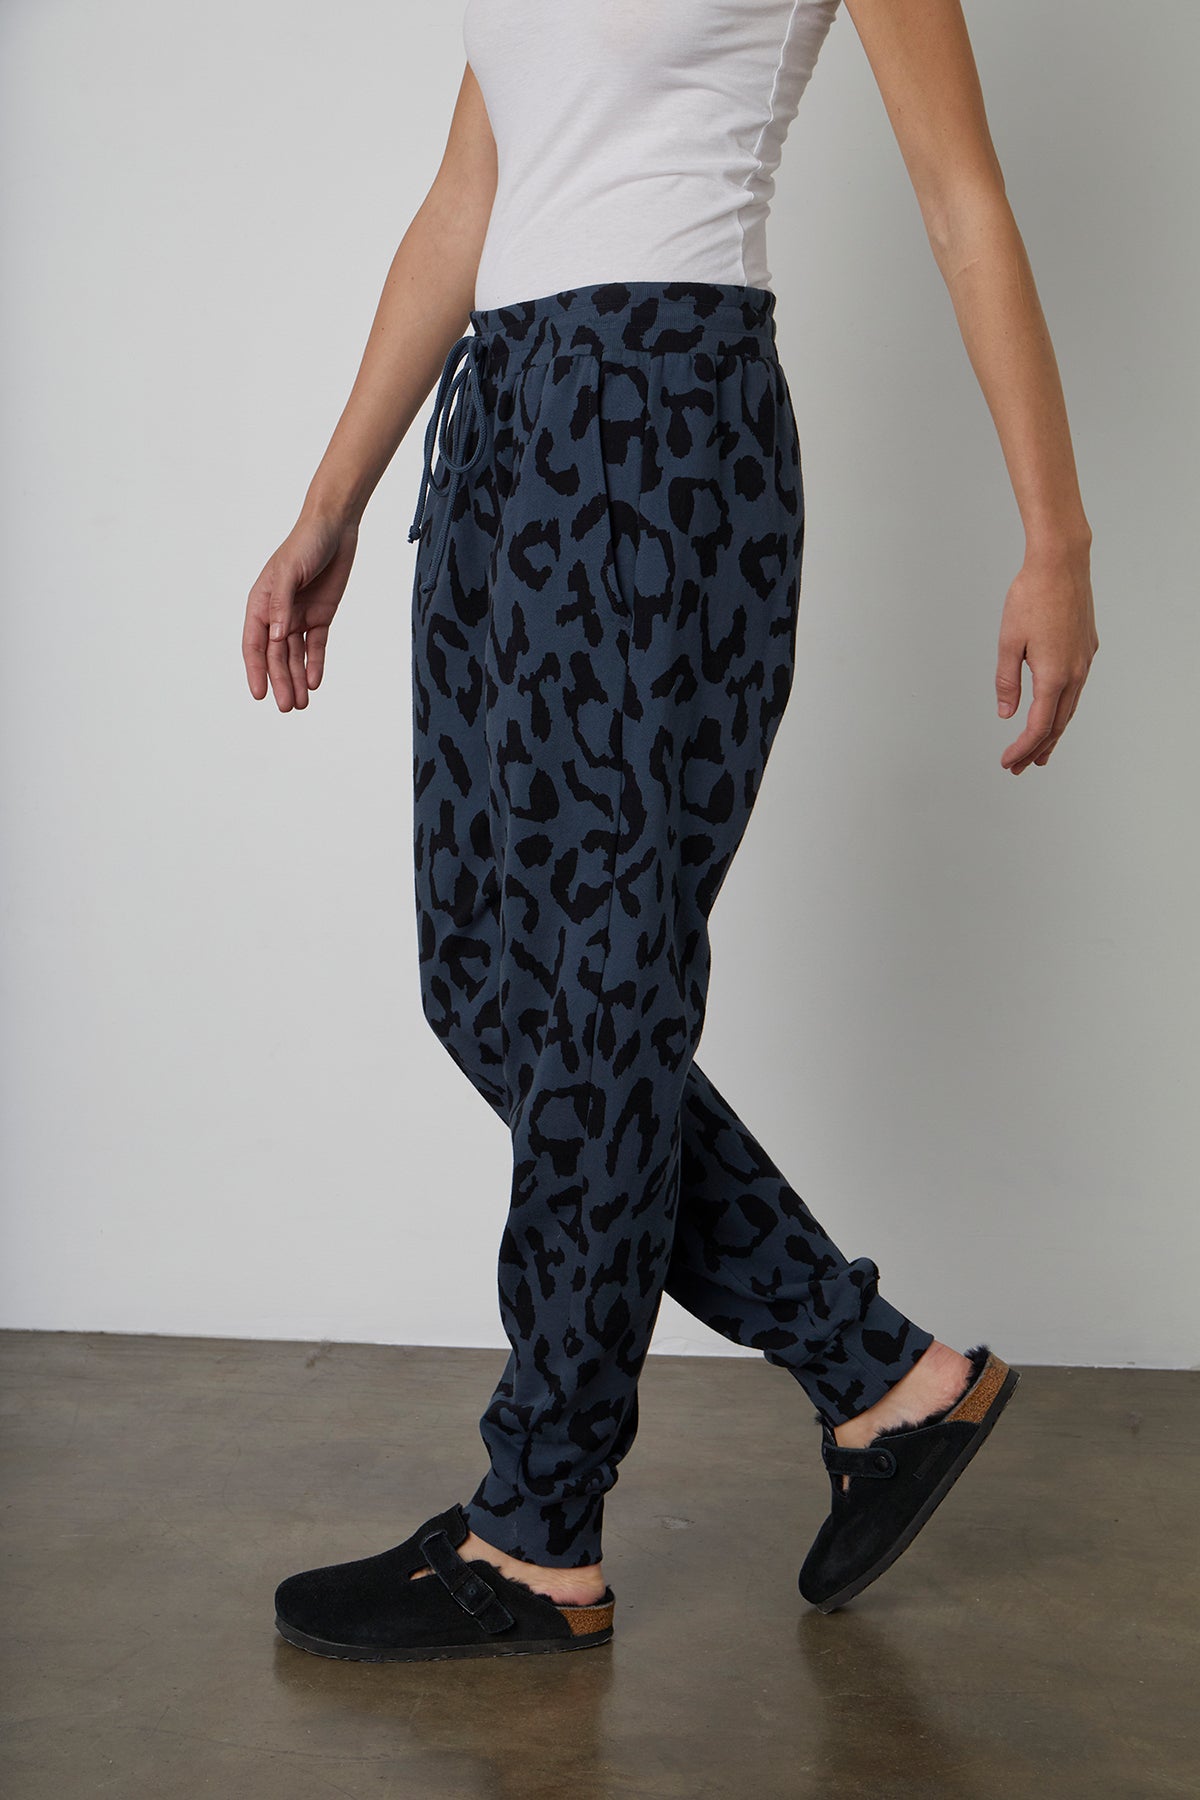   A woman wearing Velvet by Graham & Spencer's GWEN PRINTED JOGGER jogger pants with a relaxed fit. 